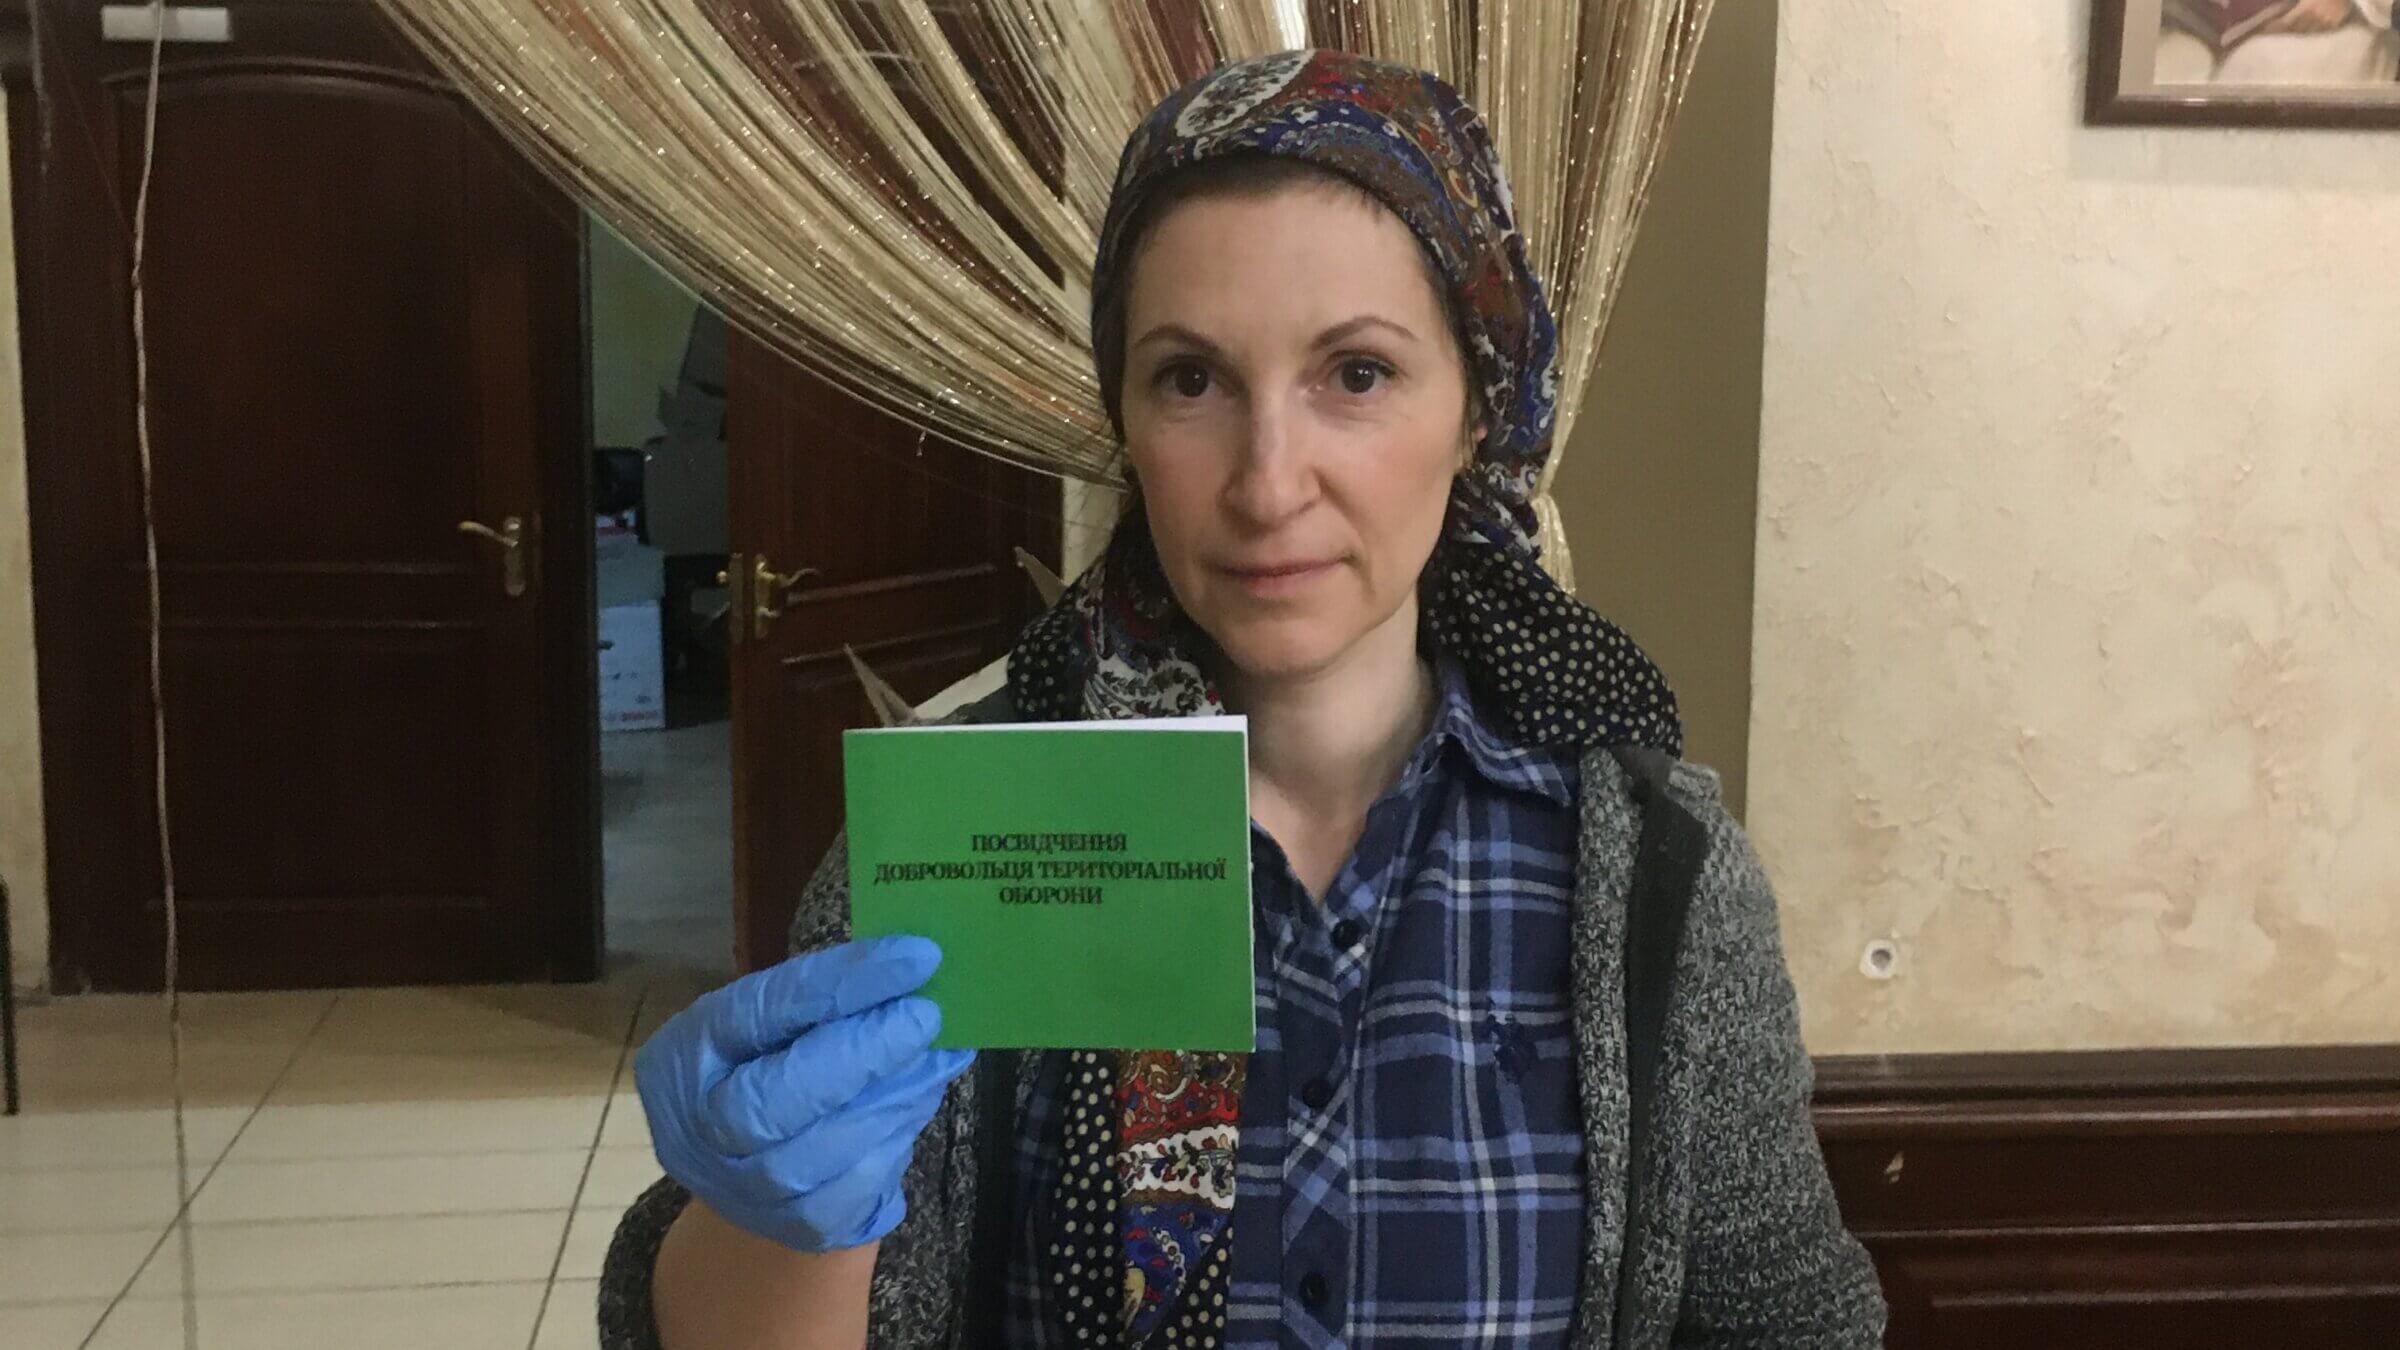 Rachel Strugatsky, at Kyiv's Brodsky Synagogue, holds up her identification card for Ukraine's Territorial Defense Forces, for which she volunteered days after Russia invaded Ukraine on Feb. 24, 2022.